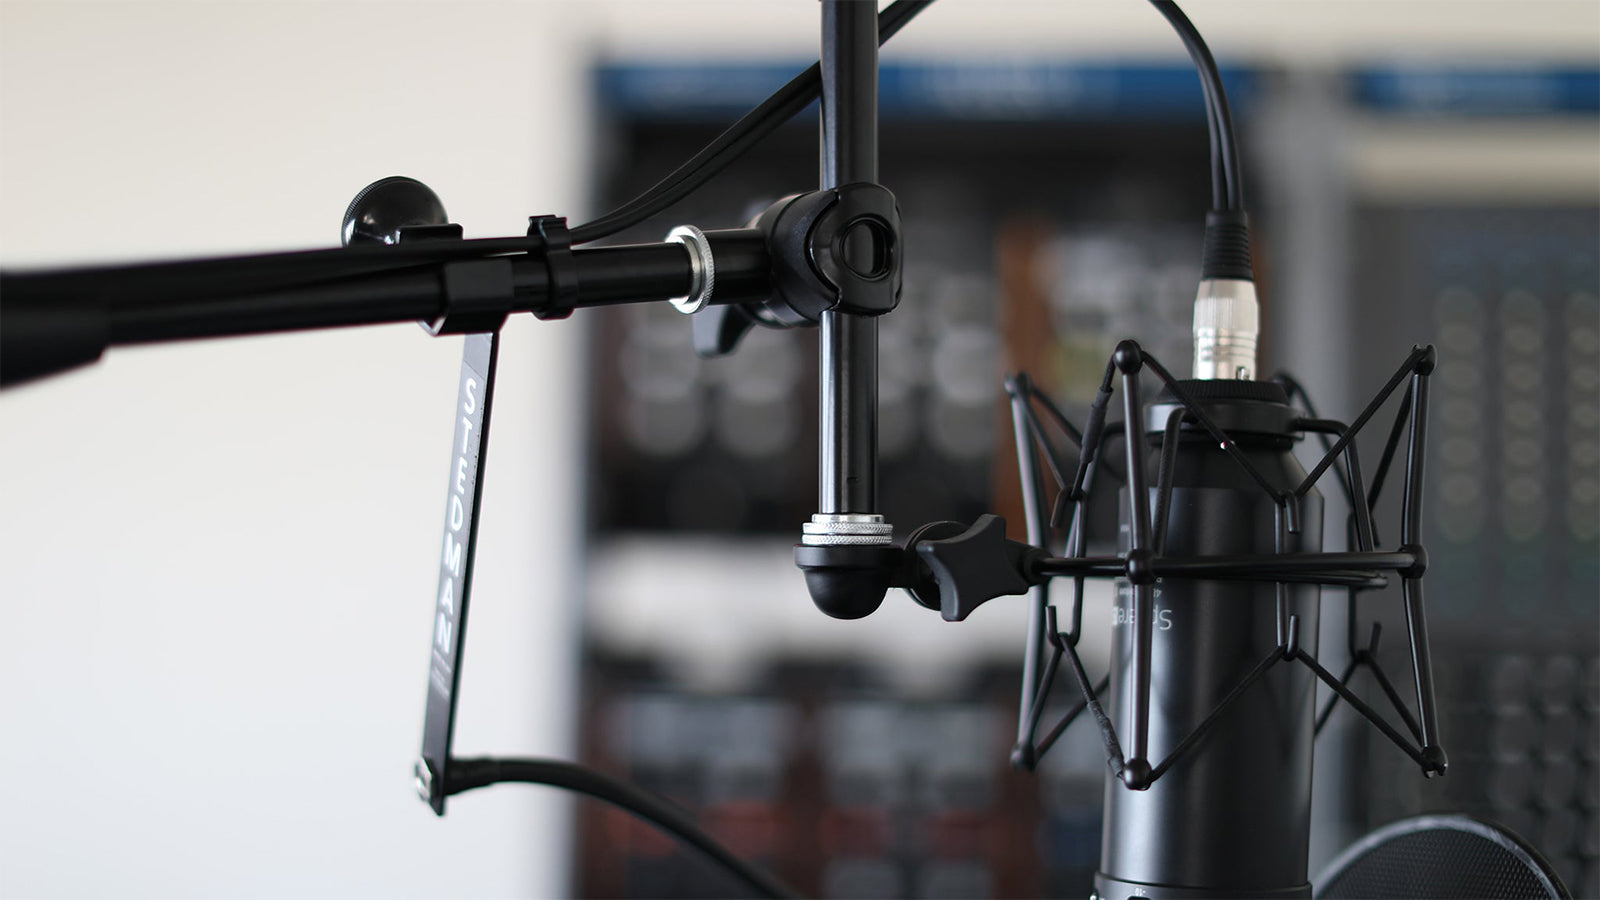 An Ultimate Support mic stand in a studio setting